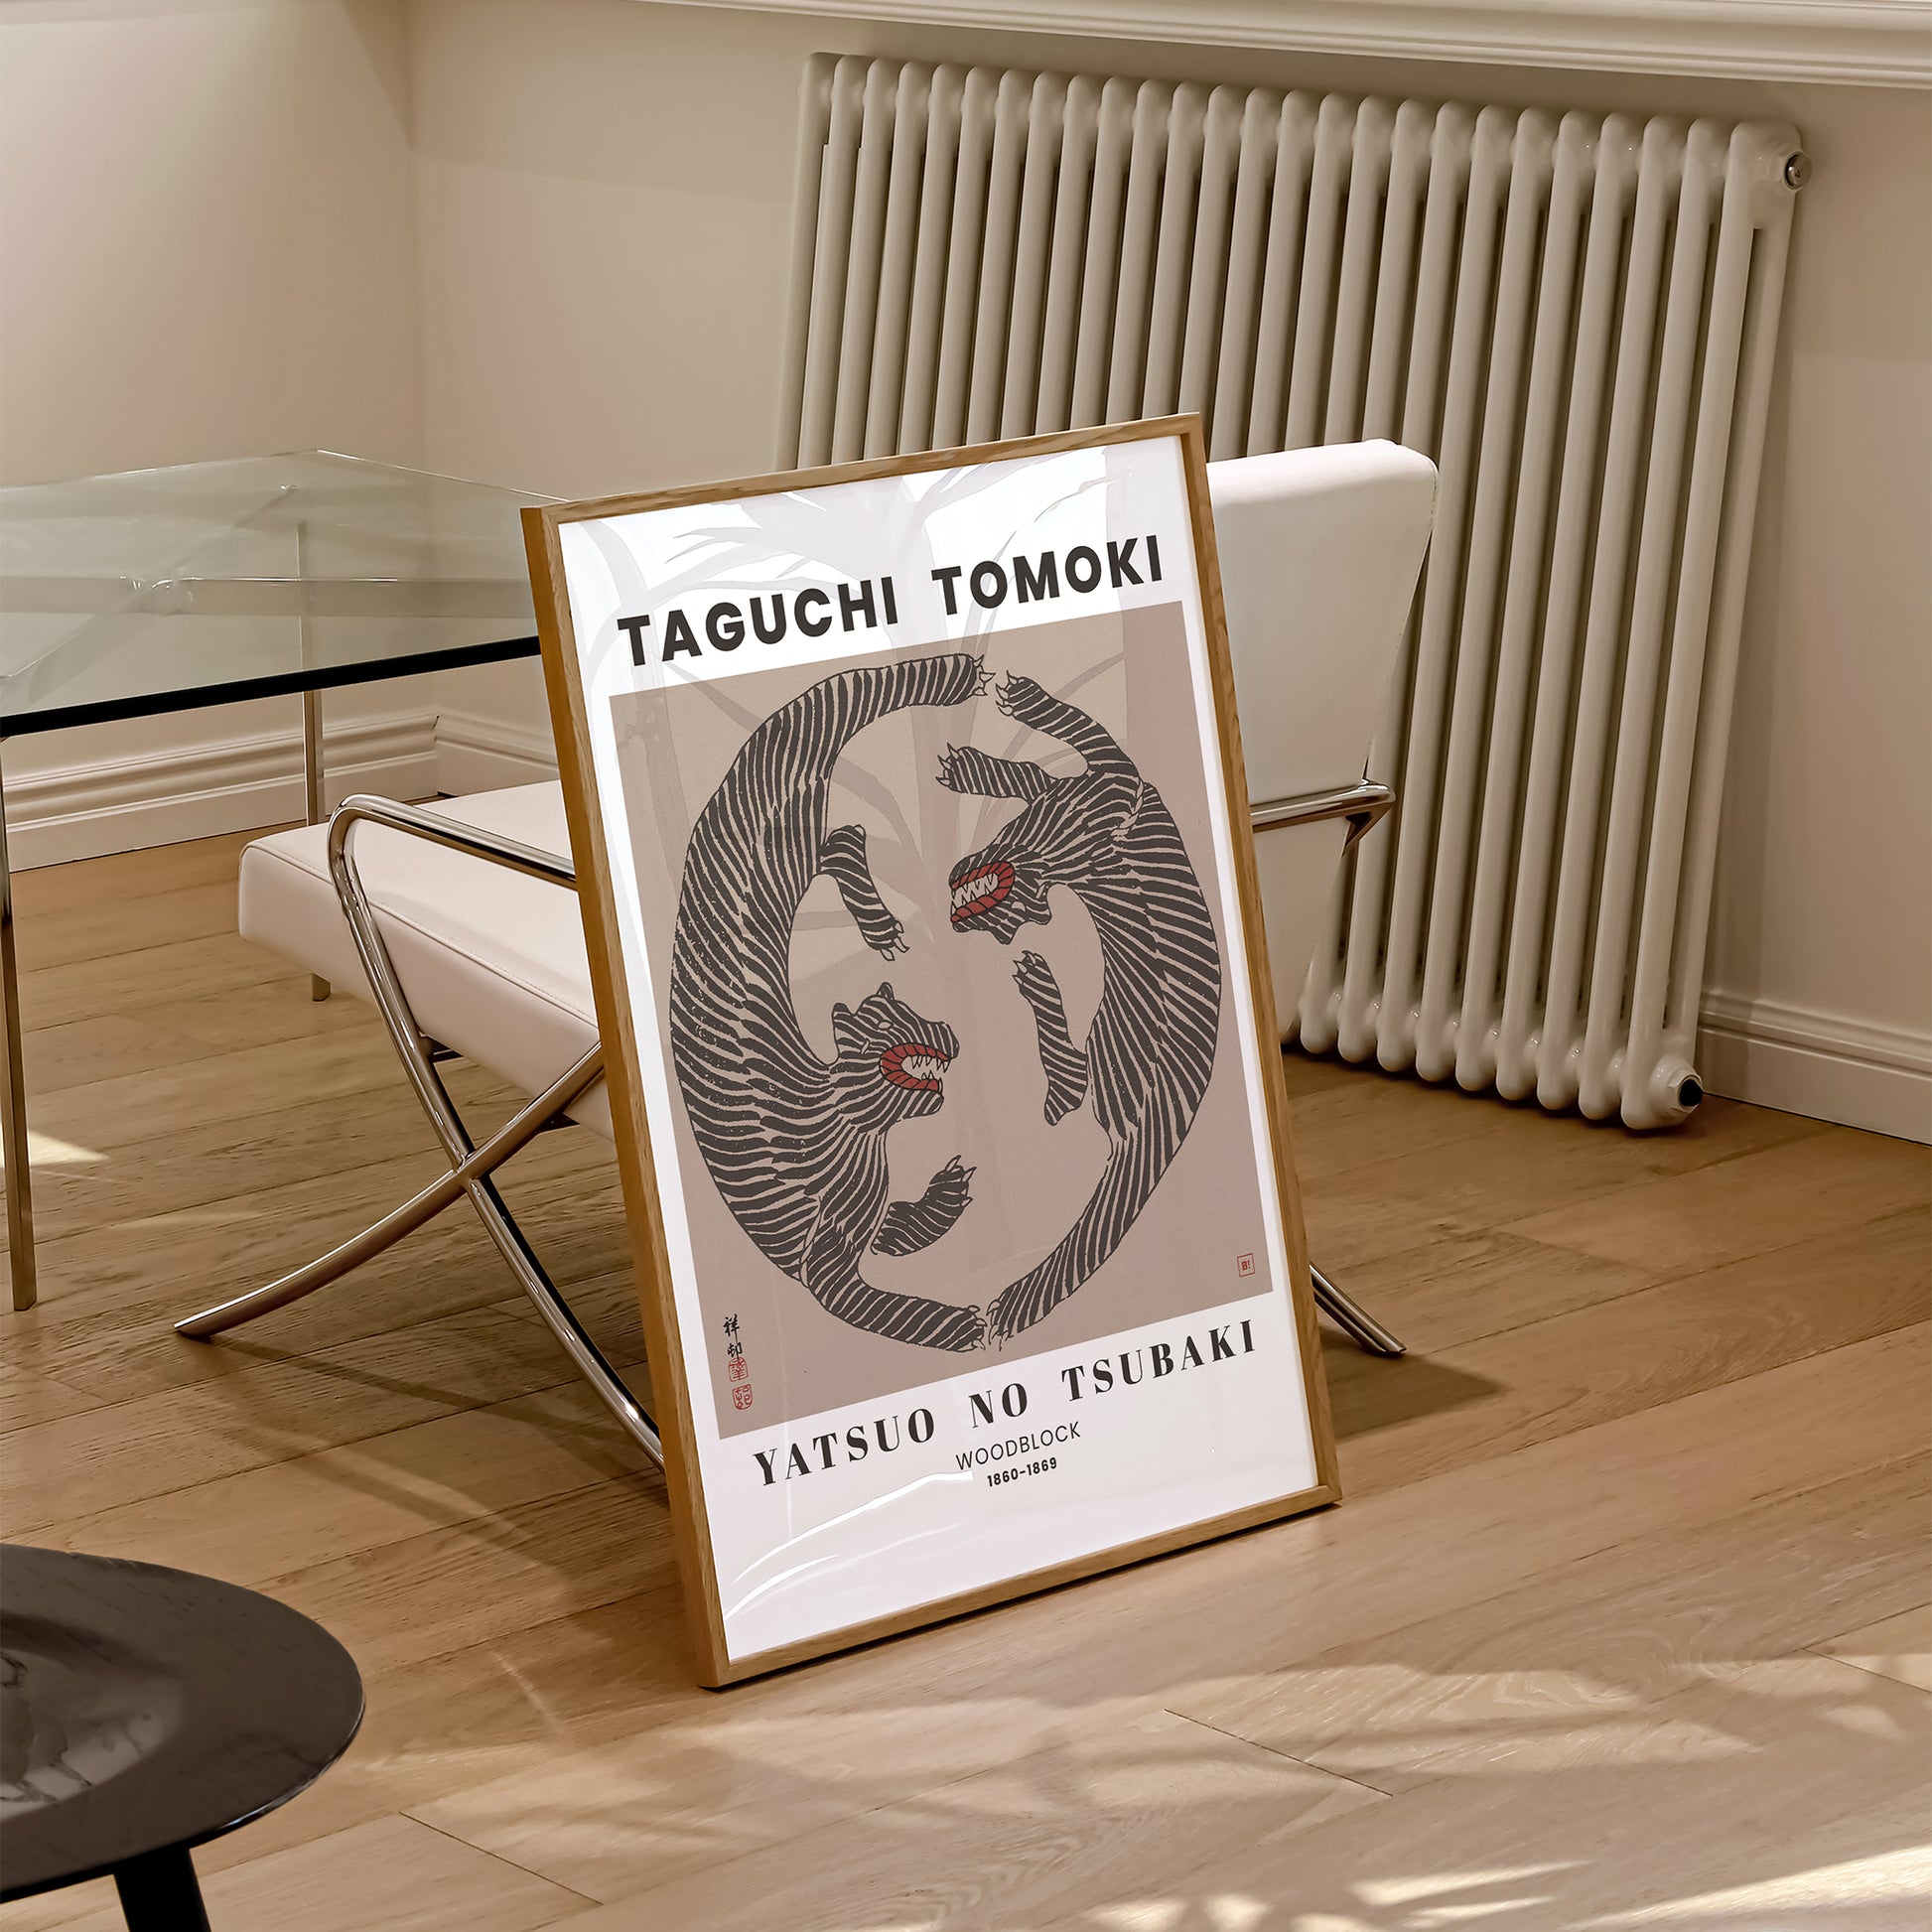 Be inspired by our remastered Taguchi Tomoki Woodblock Tigers Terracotta exhibition art print. This artwork was printed using the giclée process on archival acid-free paper and is presented in a natural oak frame that captures its timeless beauty in every detail.